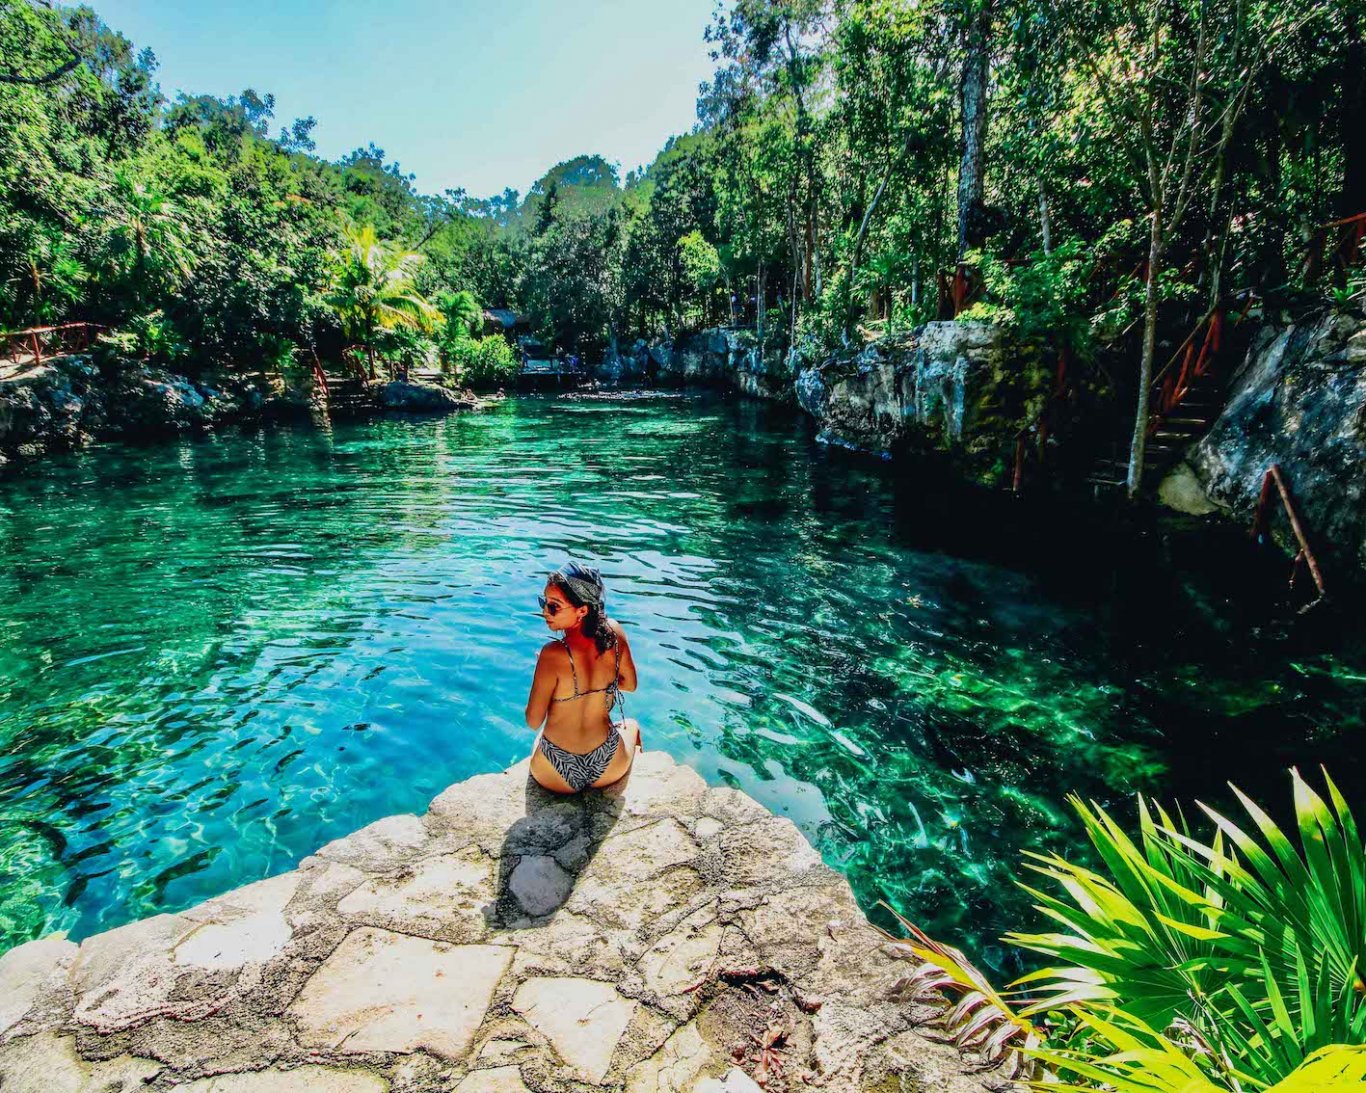 A girl in a bikini sat at the edge of a rock by bright turquoise clear water, surrounded by luscious greenery